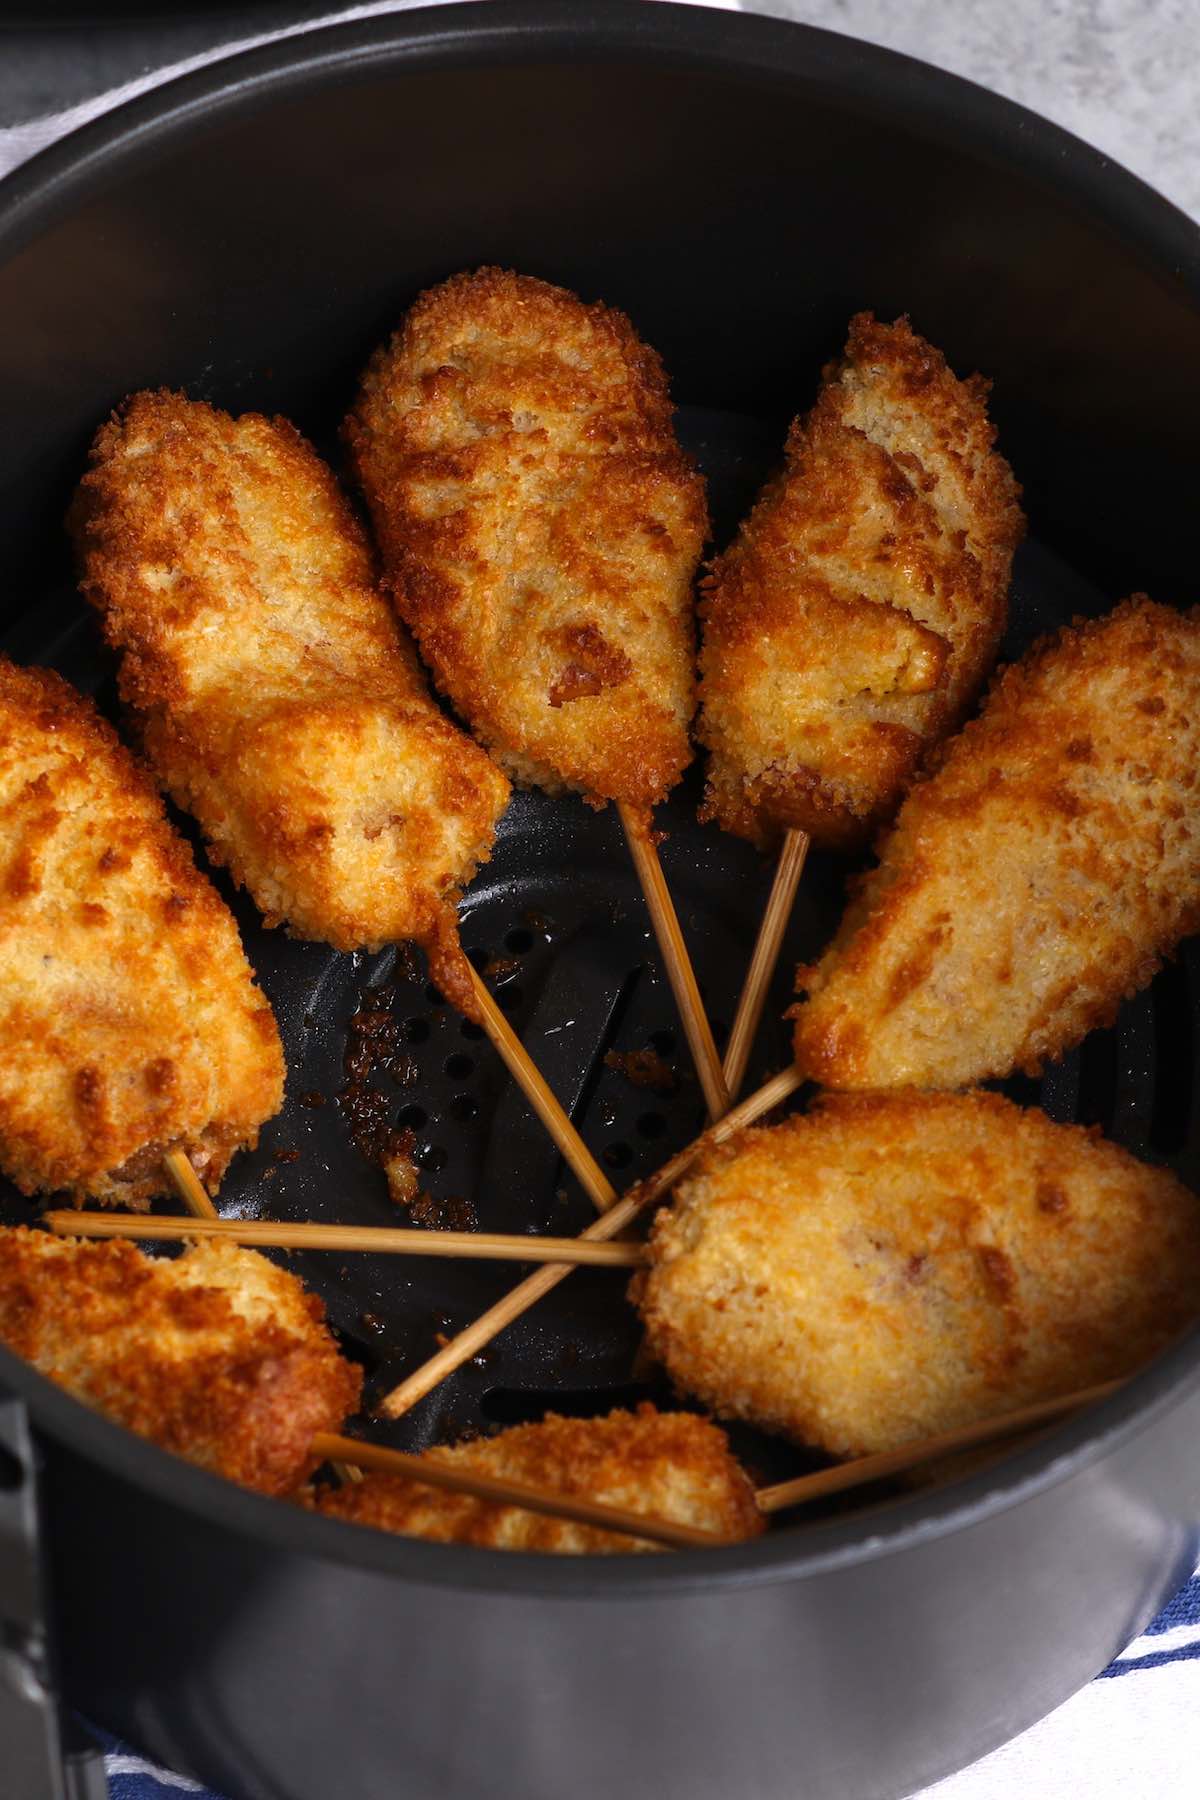 These crispy and crunchy Air Fryer Corn Dogs are made from scratch without deep-frying! A healthy corn dog recipe that everyone loves! We’ve also included instructions on how to air fry frozen corn dogs if you’d like to cook them straight from the freezer! 